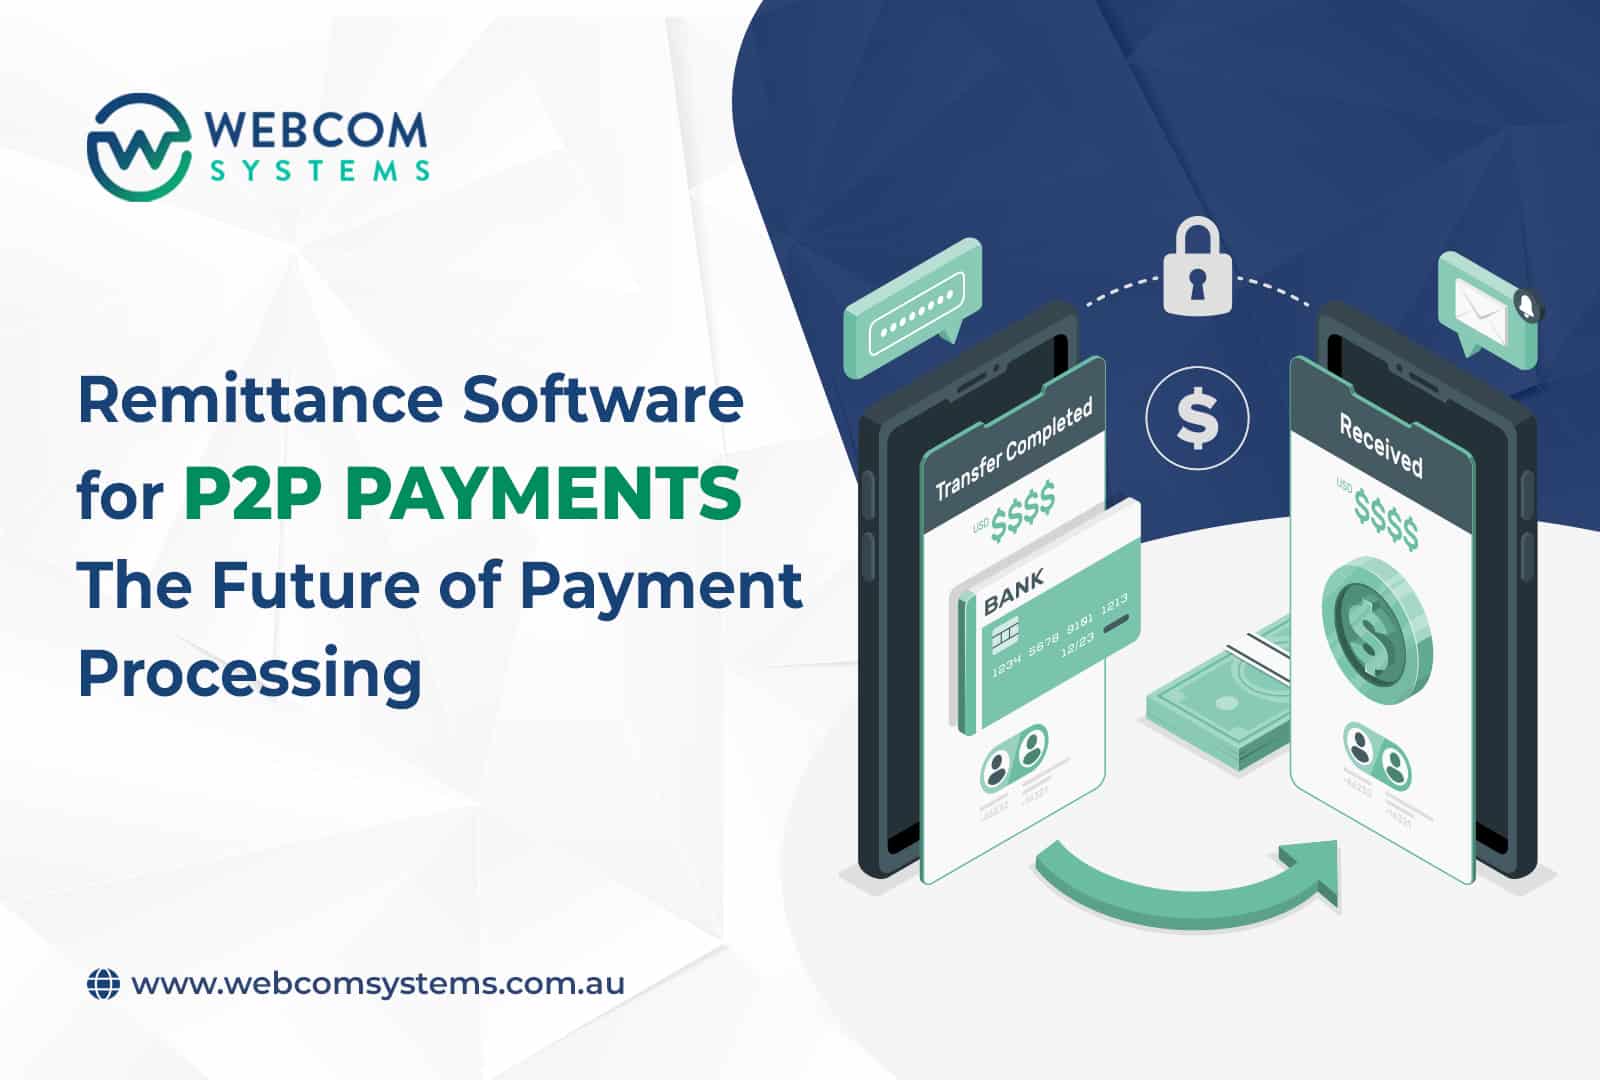 Money Remittance software for P2P payments